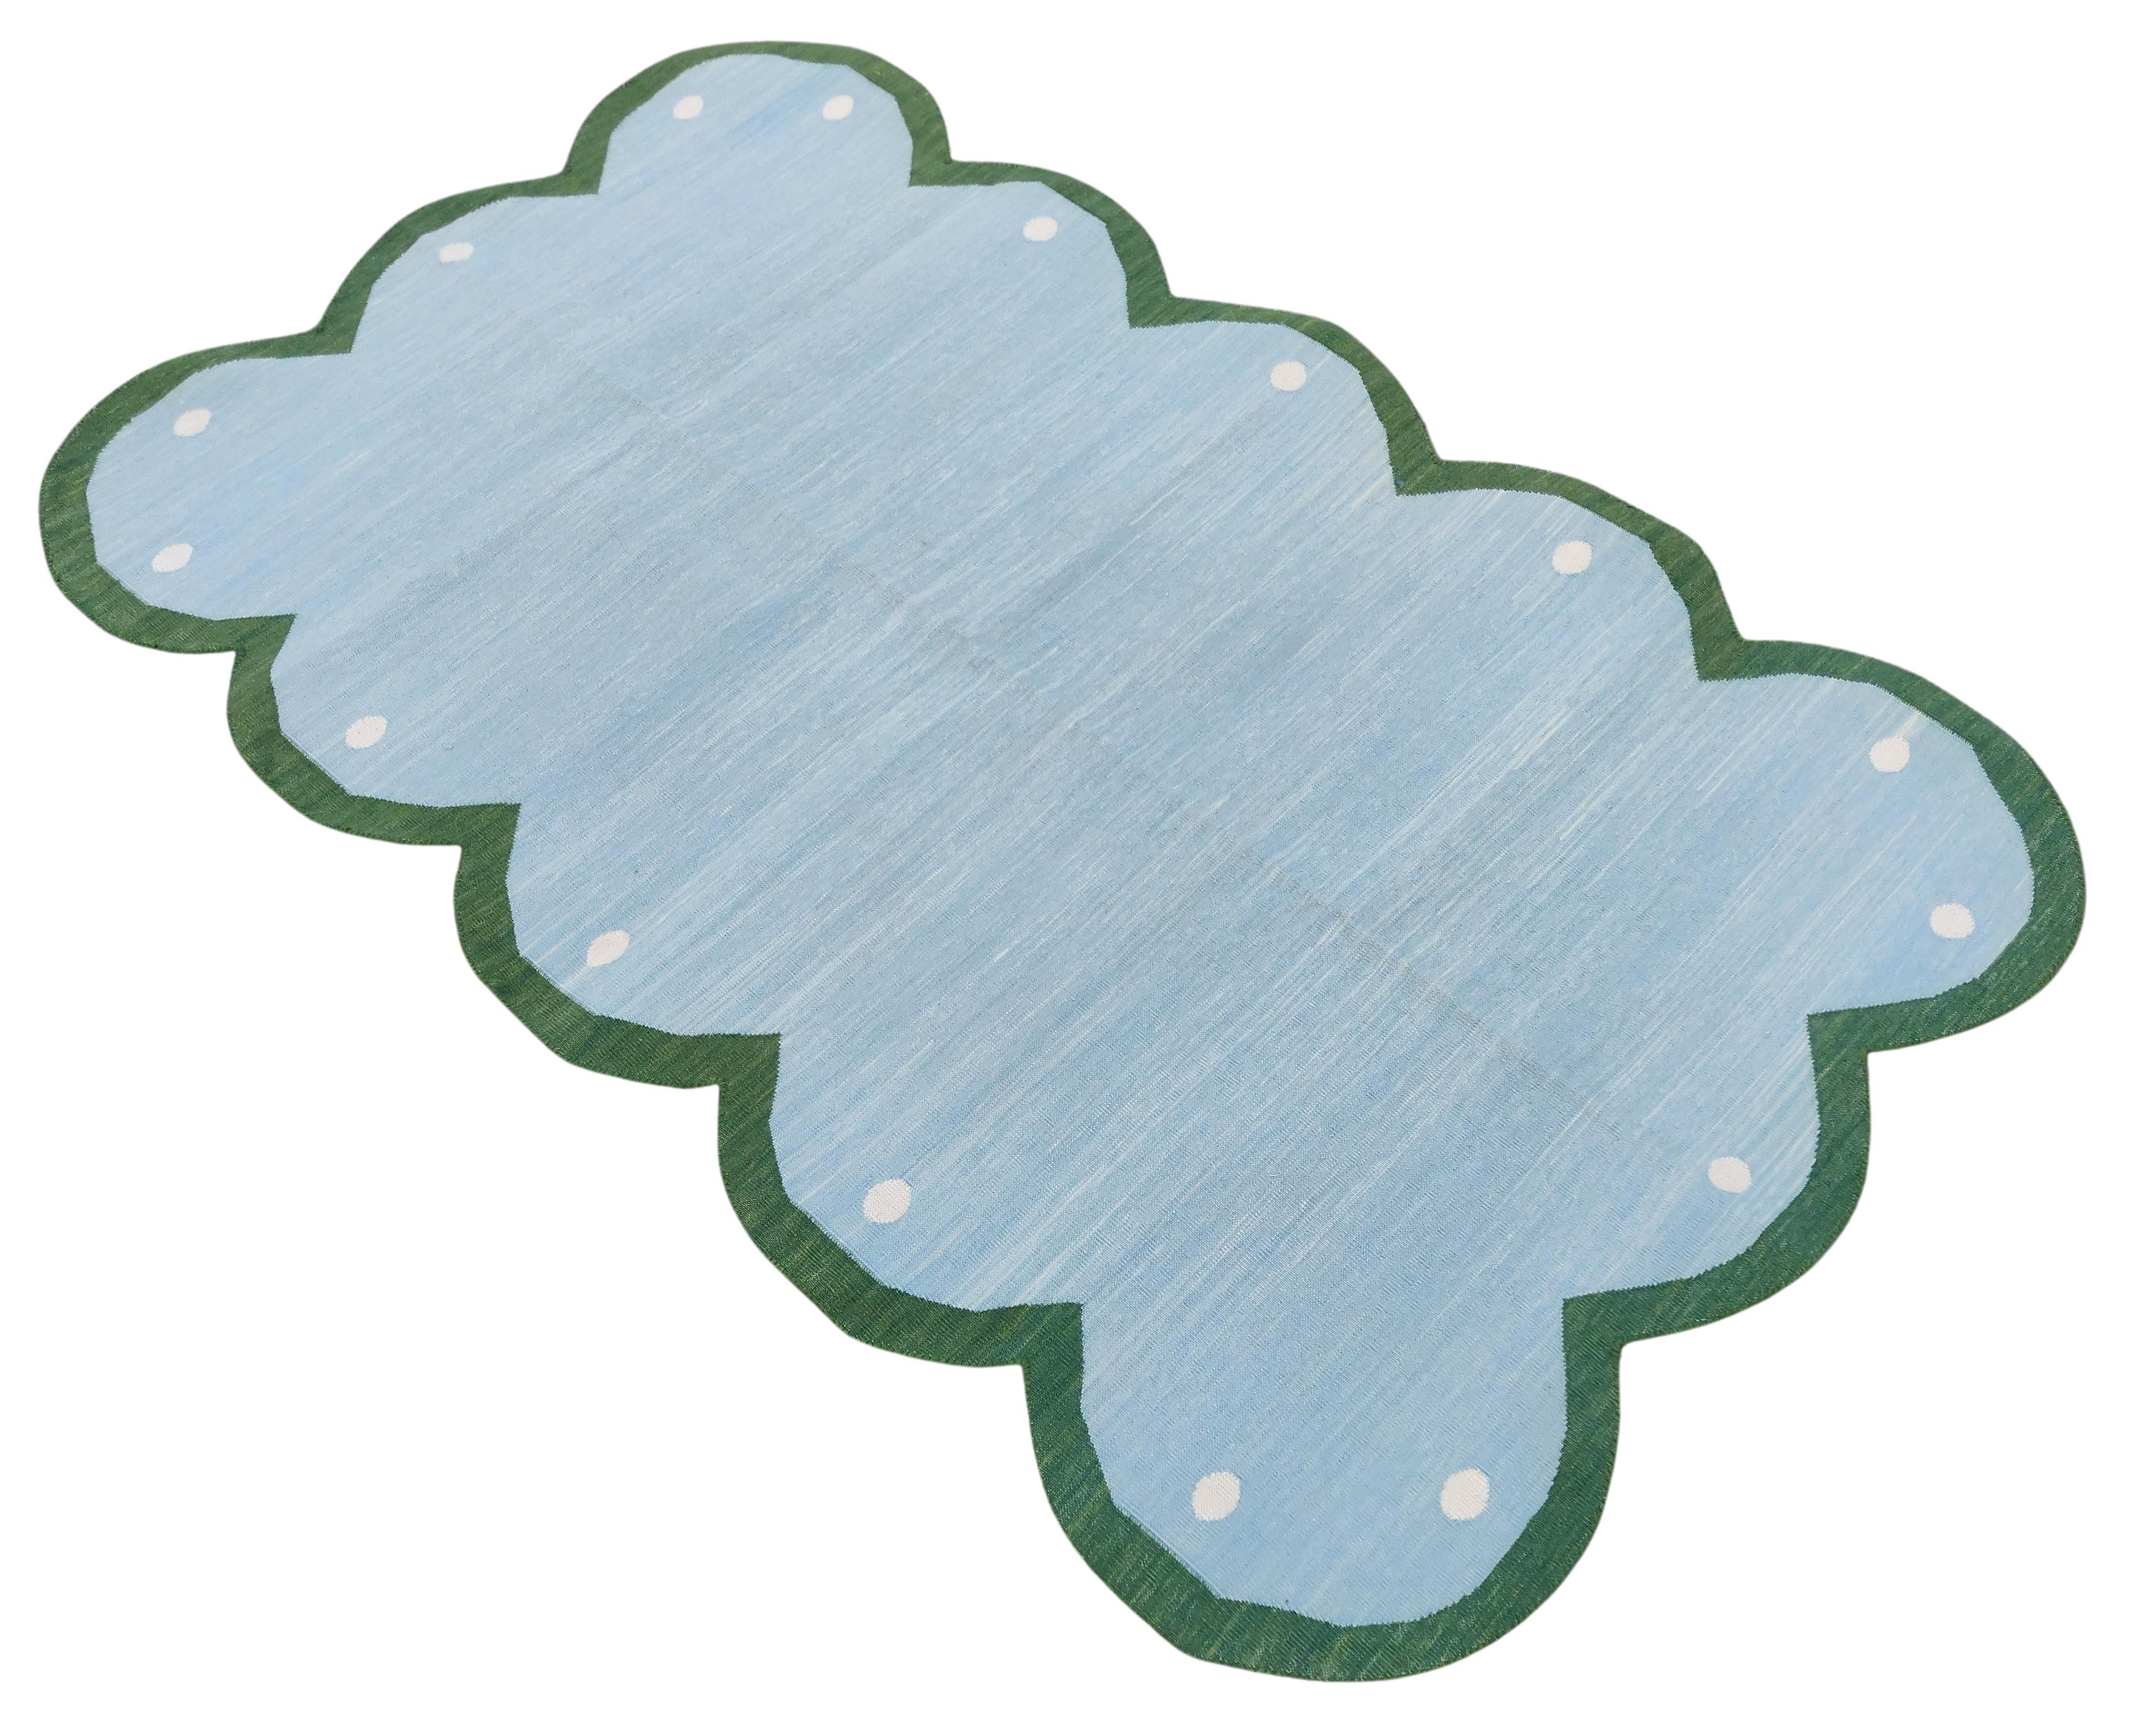 Cotton Vegetable Dyed Sky Blue & Forest Green Four Sided Scalloped Rug-12'x15' 
(Scallops runs on all 4 Sides)
These special flat-weave dhurries are hand-woven with 15 ply 100% cotton yarn. Due to the special manufacturing techniques used to create